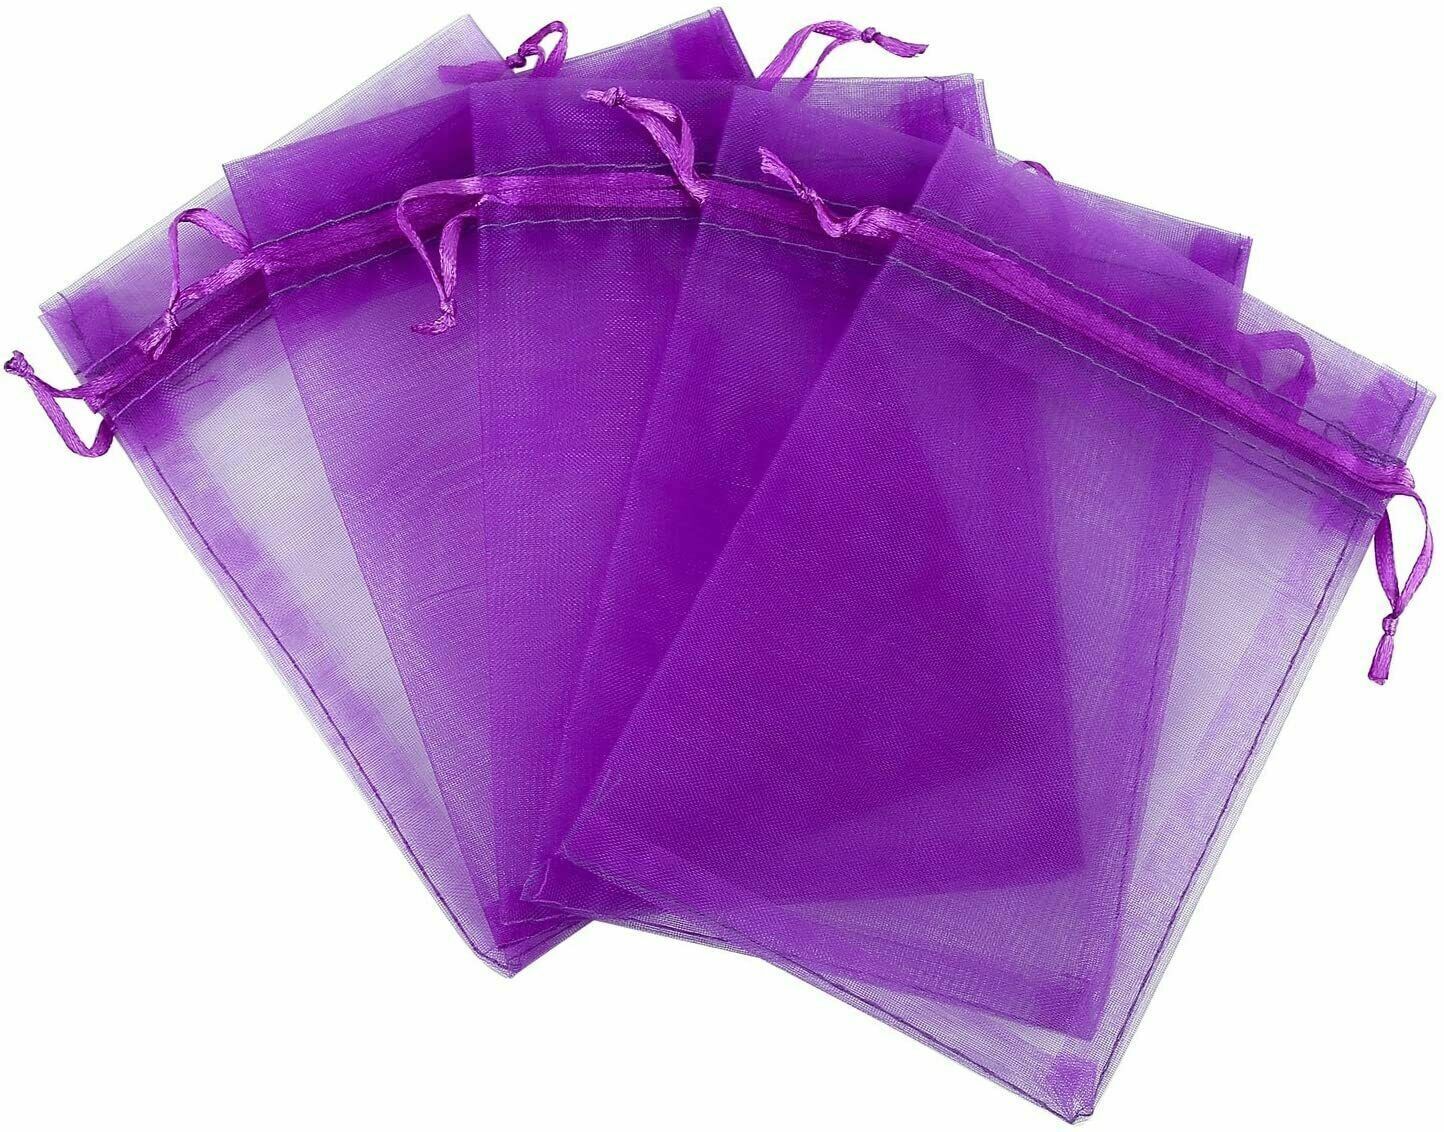  New "4x4" Drawstring Organza Bags Jewelry Pouches Wedding Party Favor Gift Bags Unbranded - фотография #3